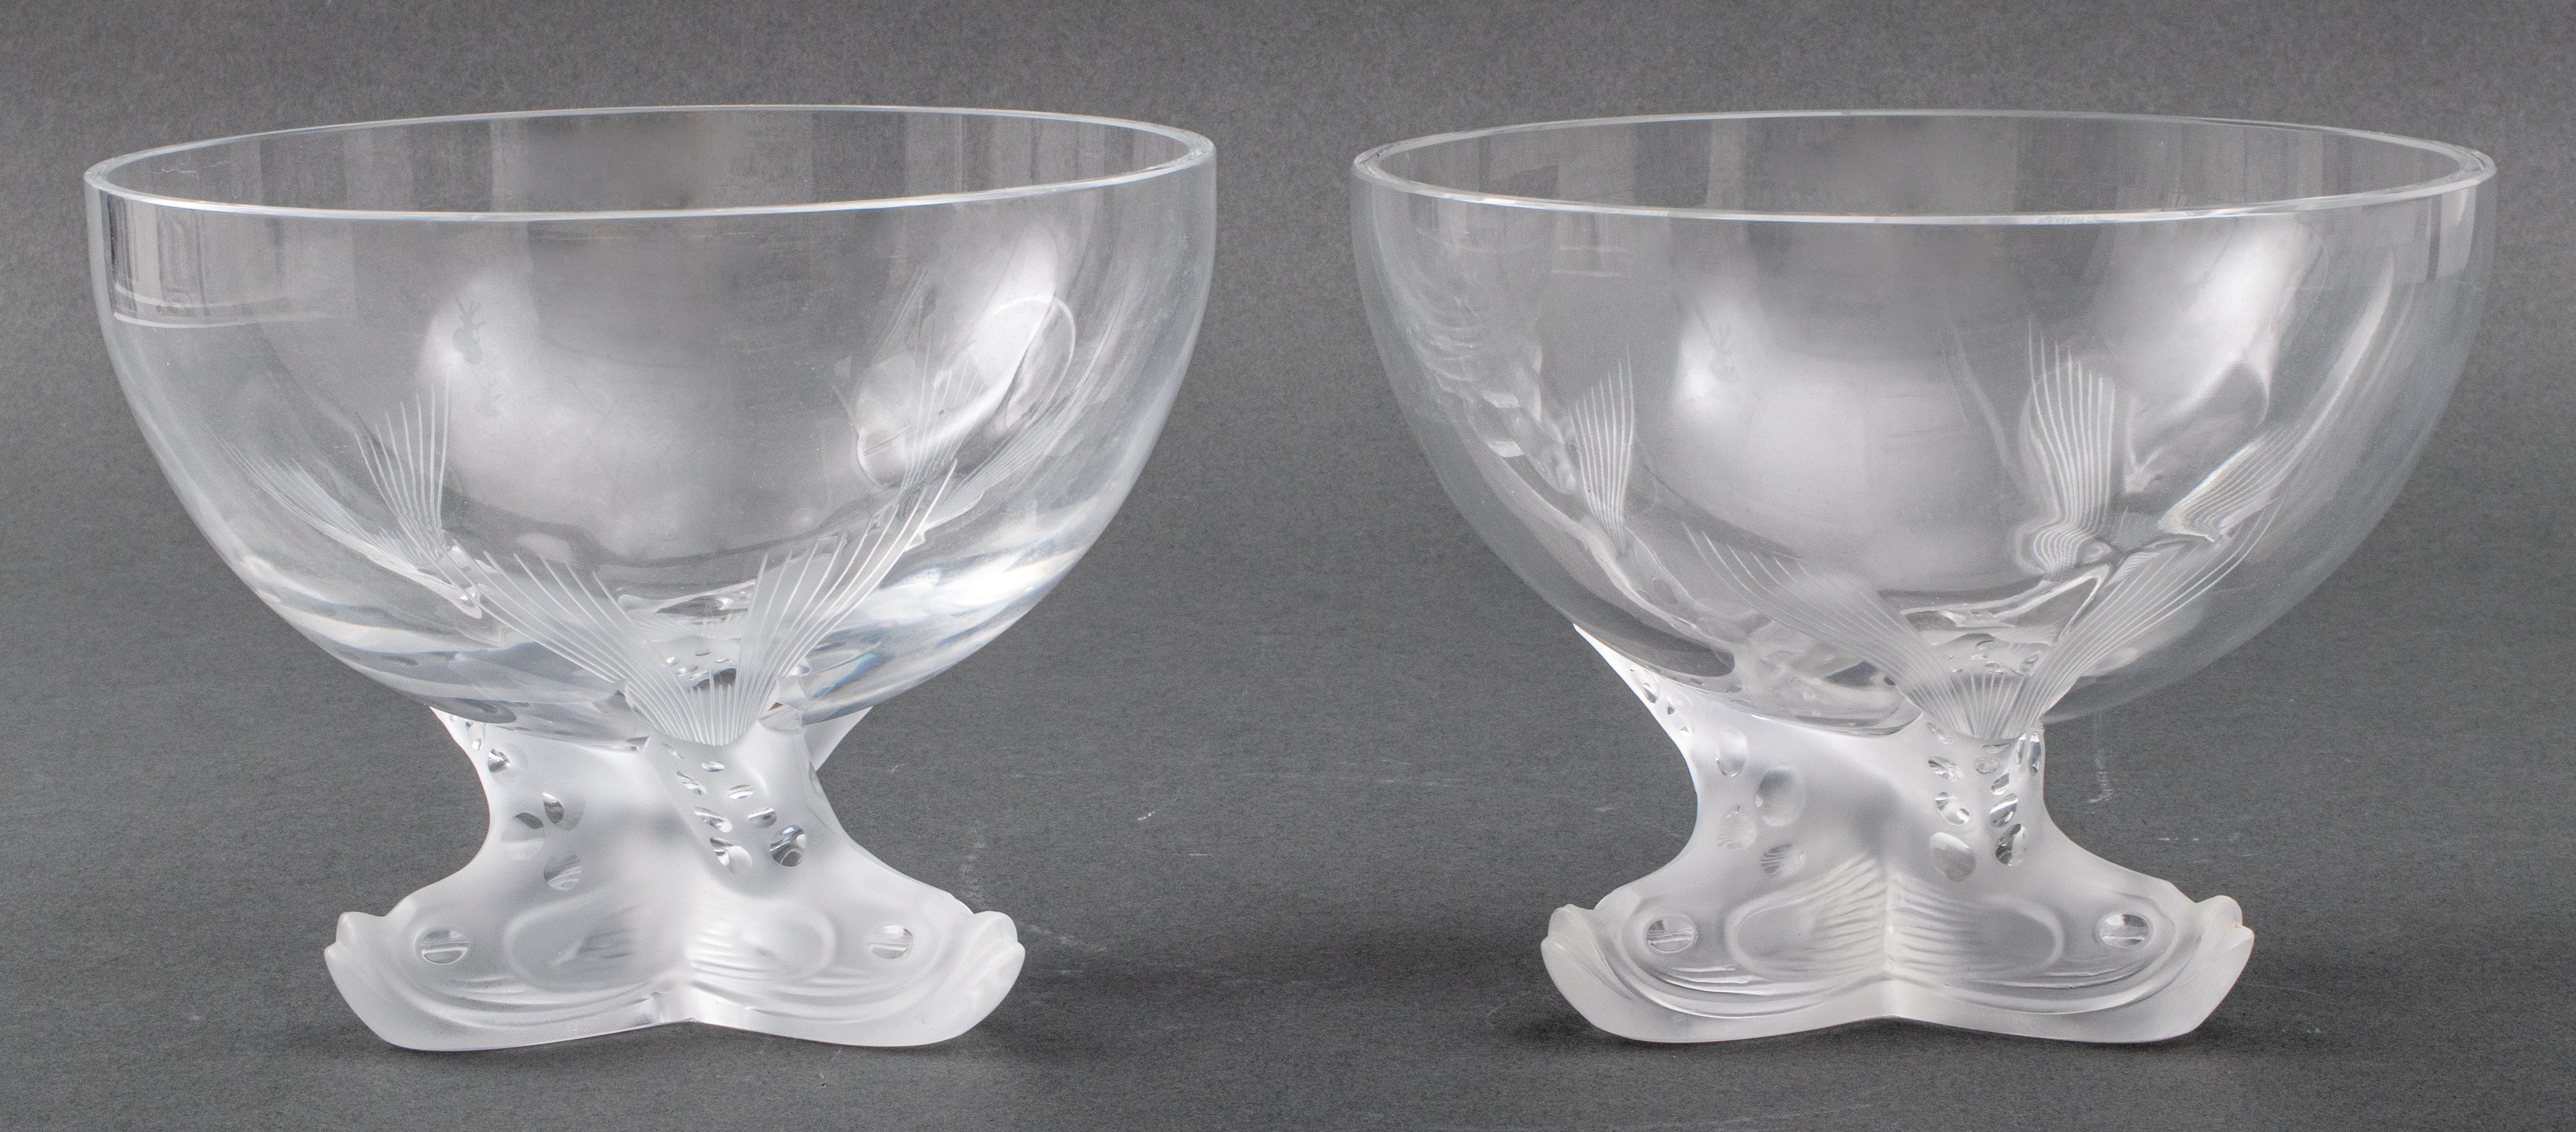 LALIQUE FRENCH ART GLASS CRYSTAL 2be3c2